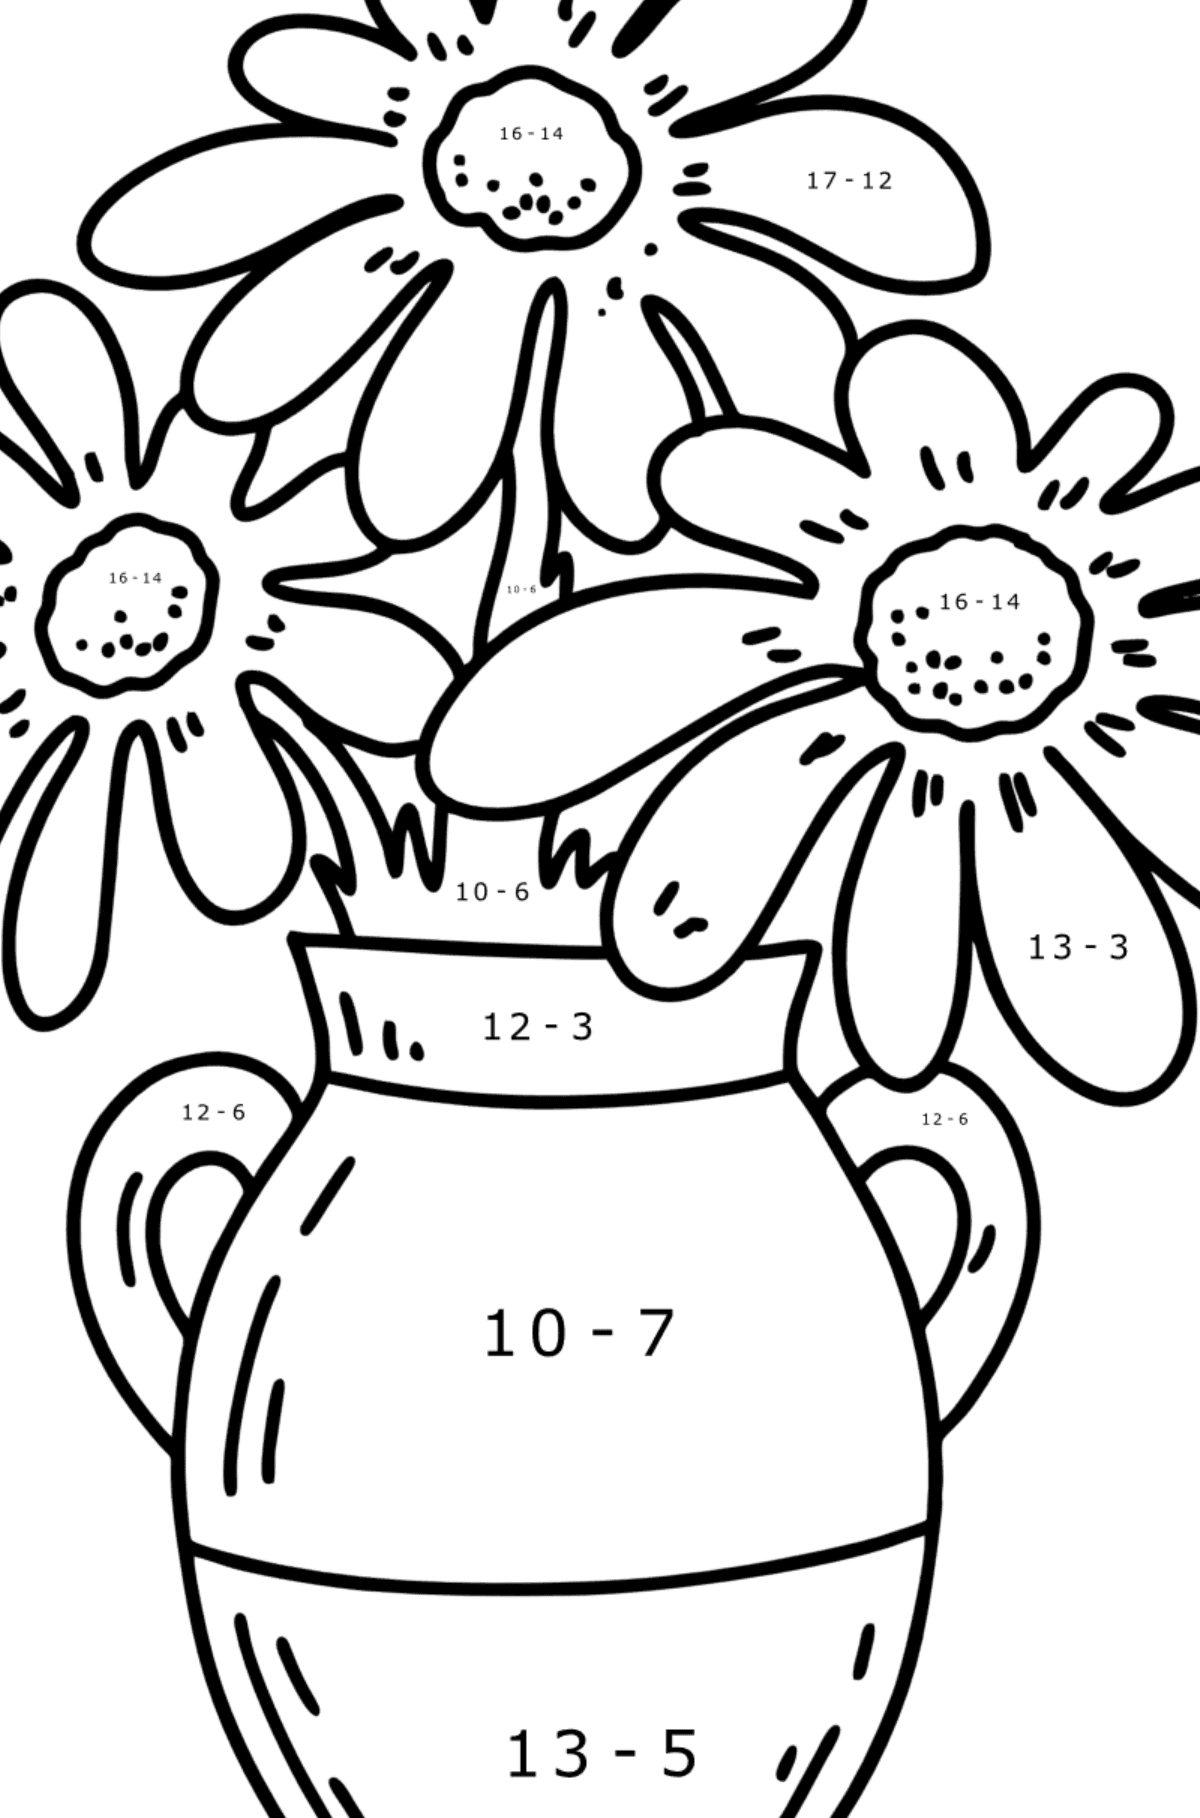 Summer Coloring page - Flowers in a vase - Math Coloring - Subtraction for Kids